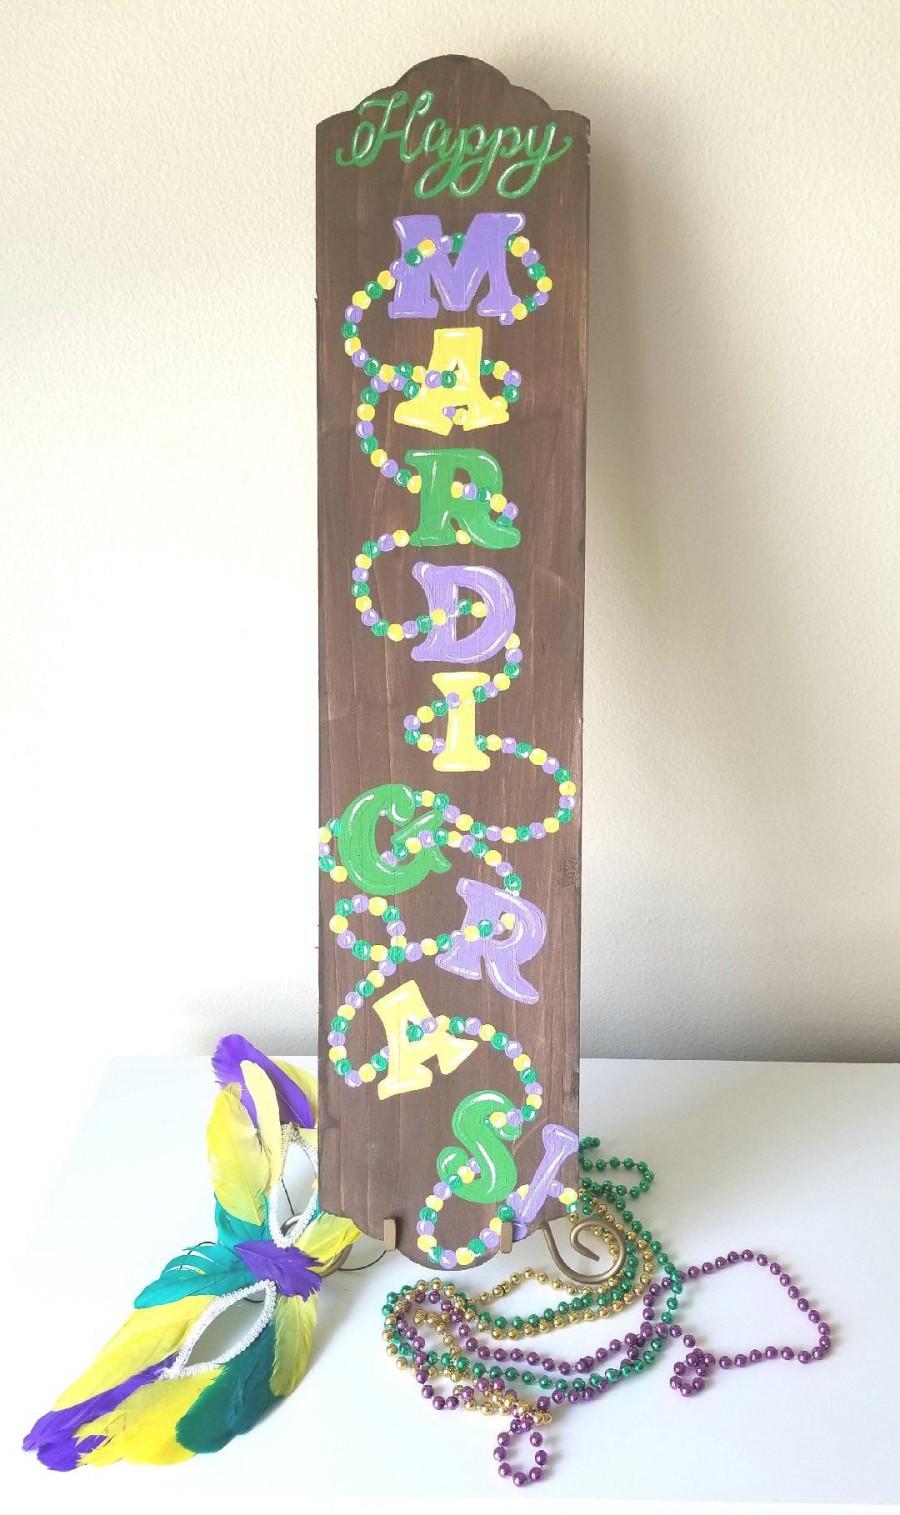 Hochzeit - Happy Mardi Gras hand painted wood sign indoor or outdoor decor mardi gras colors beads surround letters stand against wall or outside door